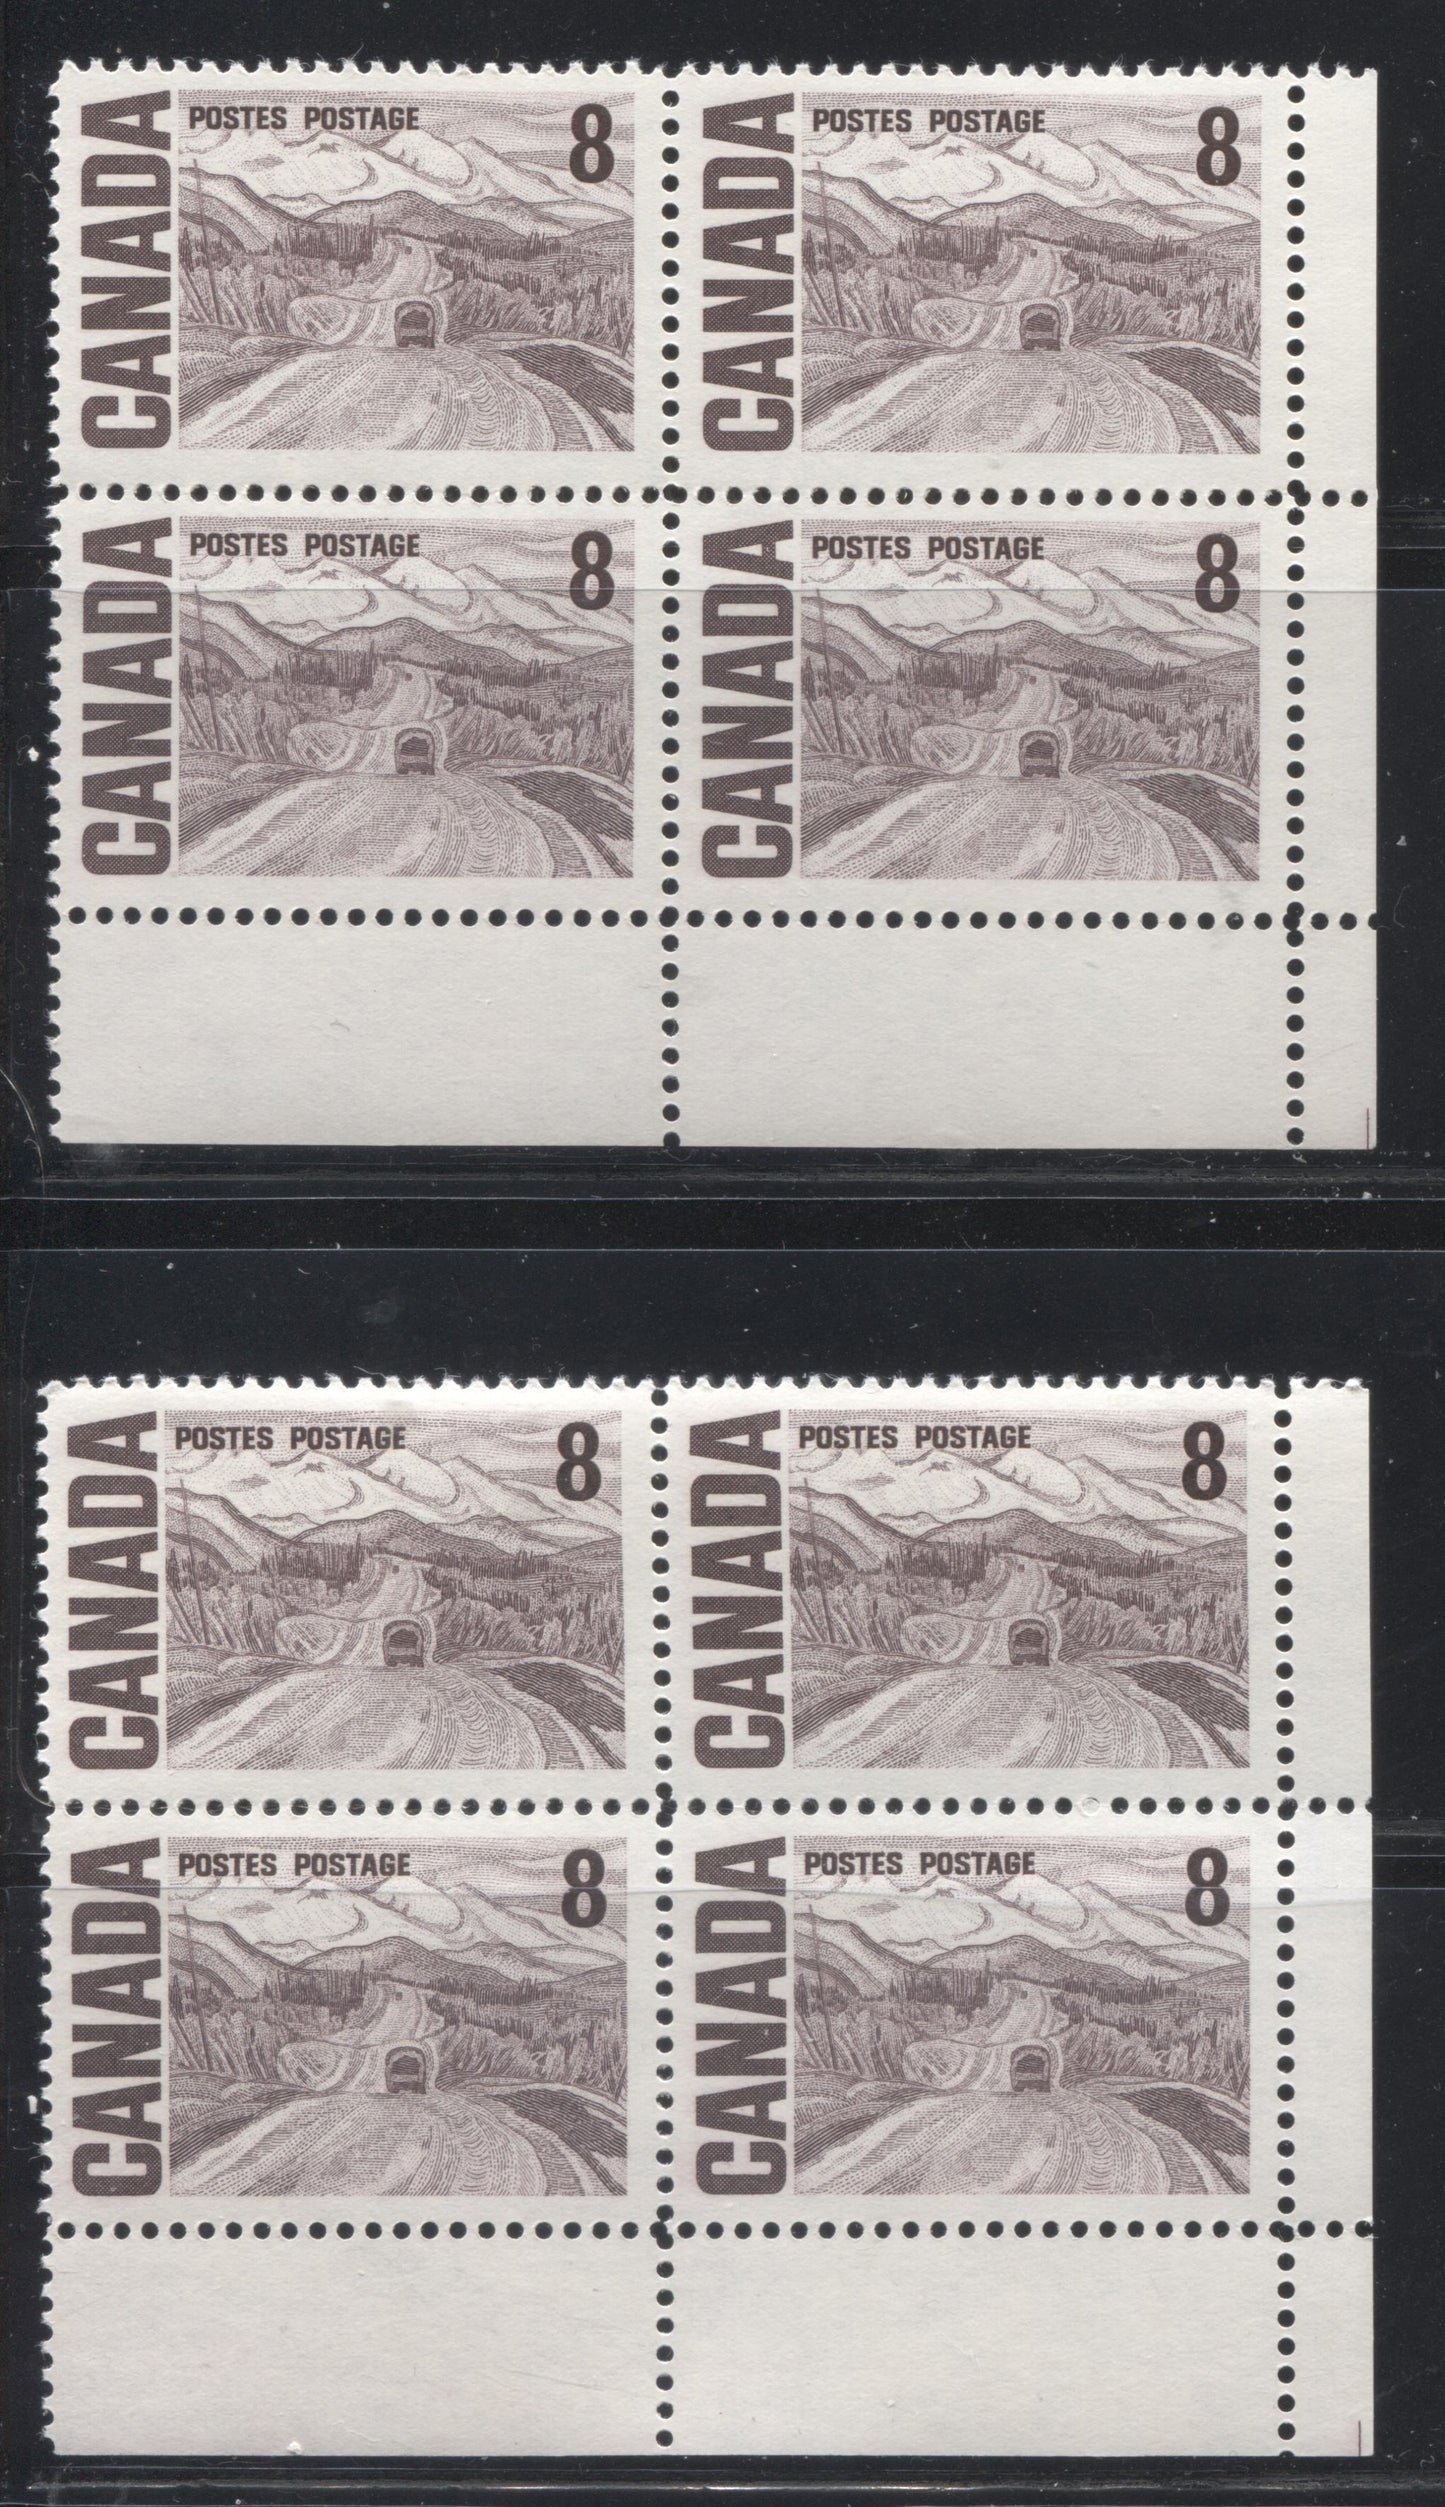 Lot 42 Canada #461iv 8c Violet Brown Alaska Highway, 1967-1973 Centennial Definitive Issue, Two VFNH LR Field Stock Cutting Guideline Blocks Of 4 On NF Violet Horizontal & Vertical Wove Papers With Streaky & Smooth Dex Gum